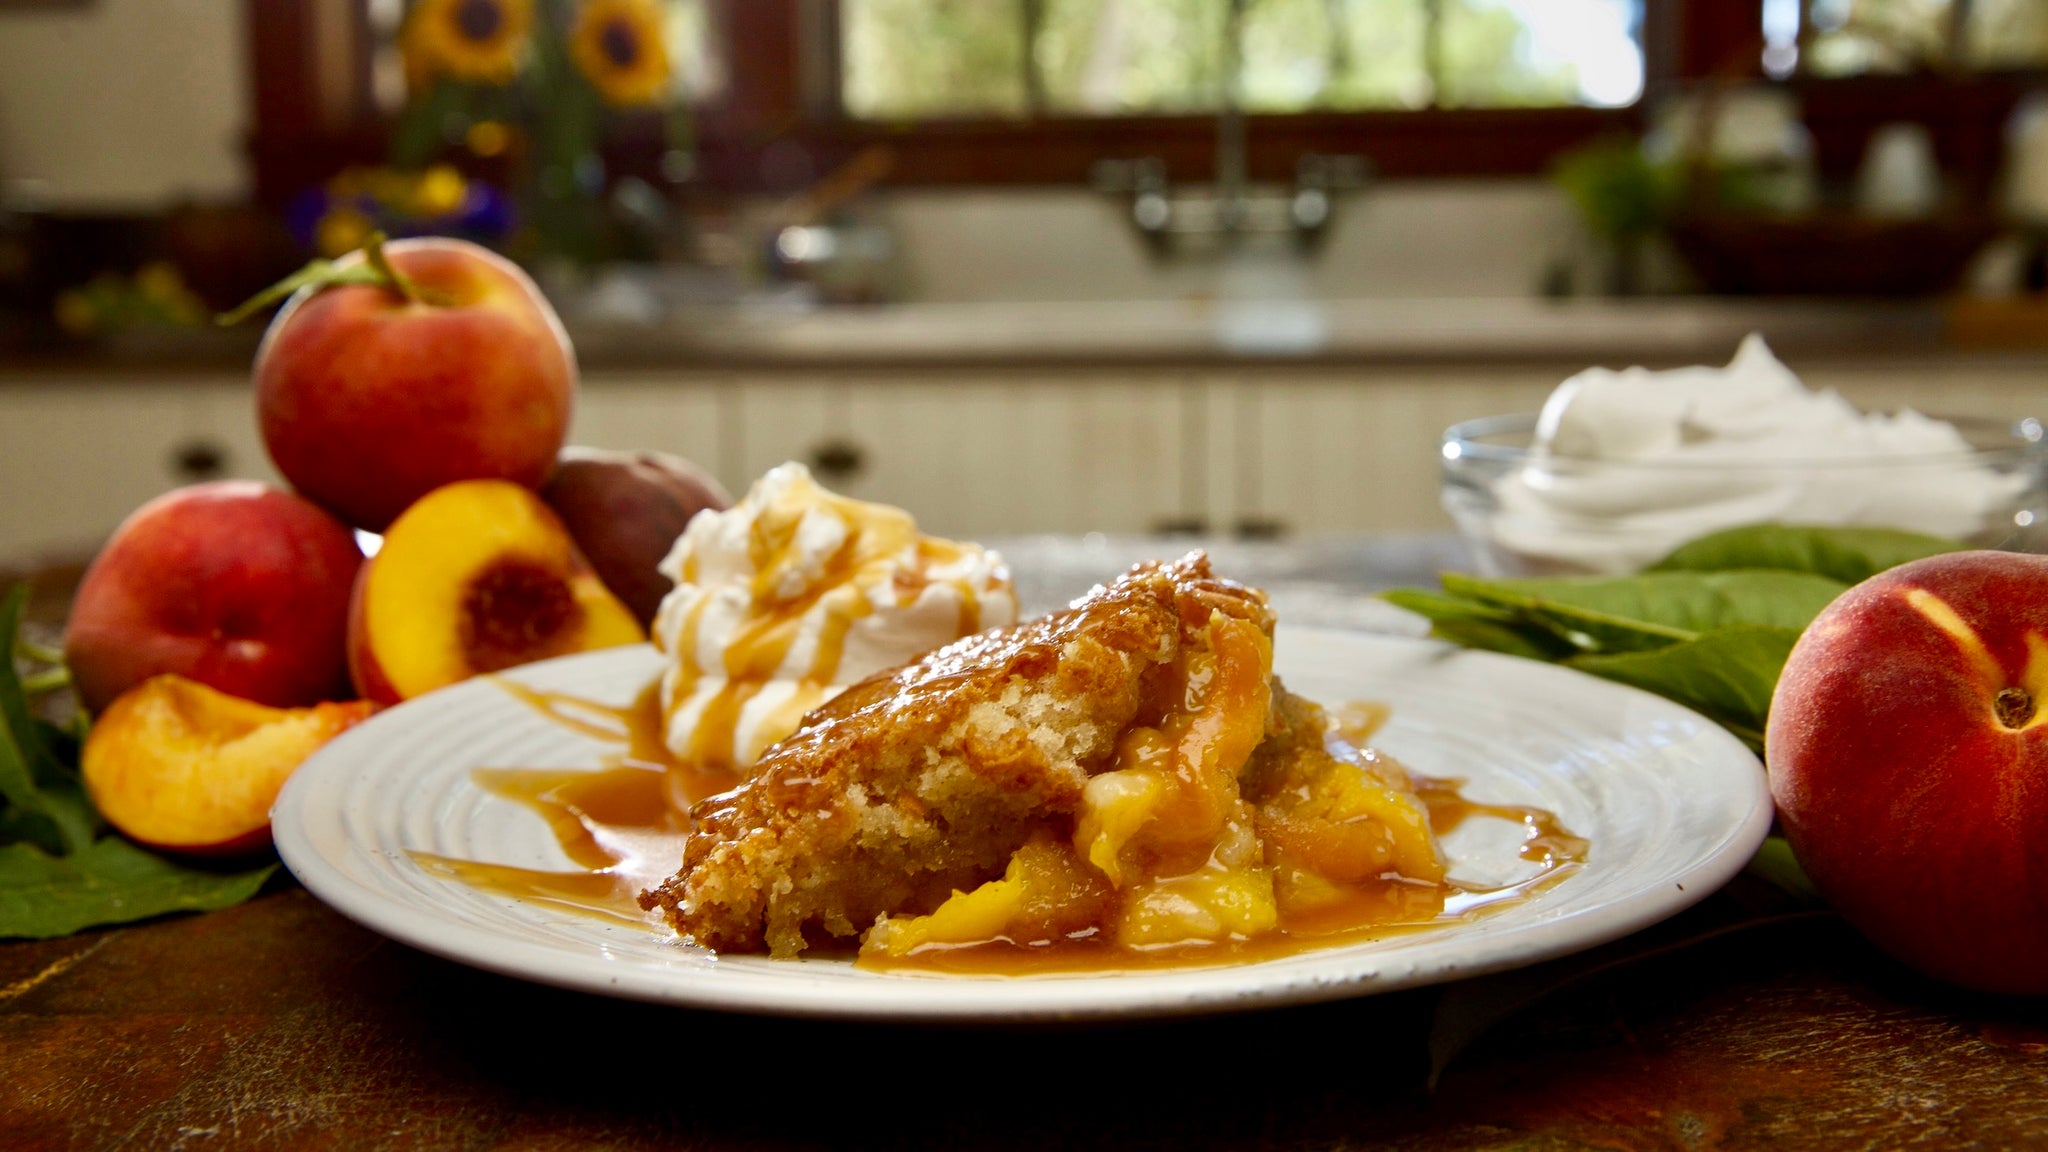 Peach Buckle with Homemade Caramel Sauce and Whipped Cream